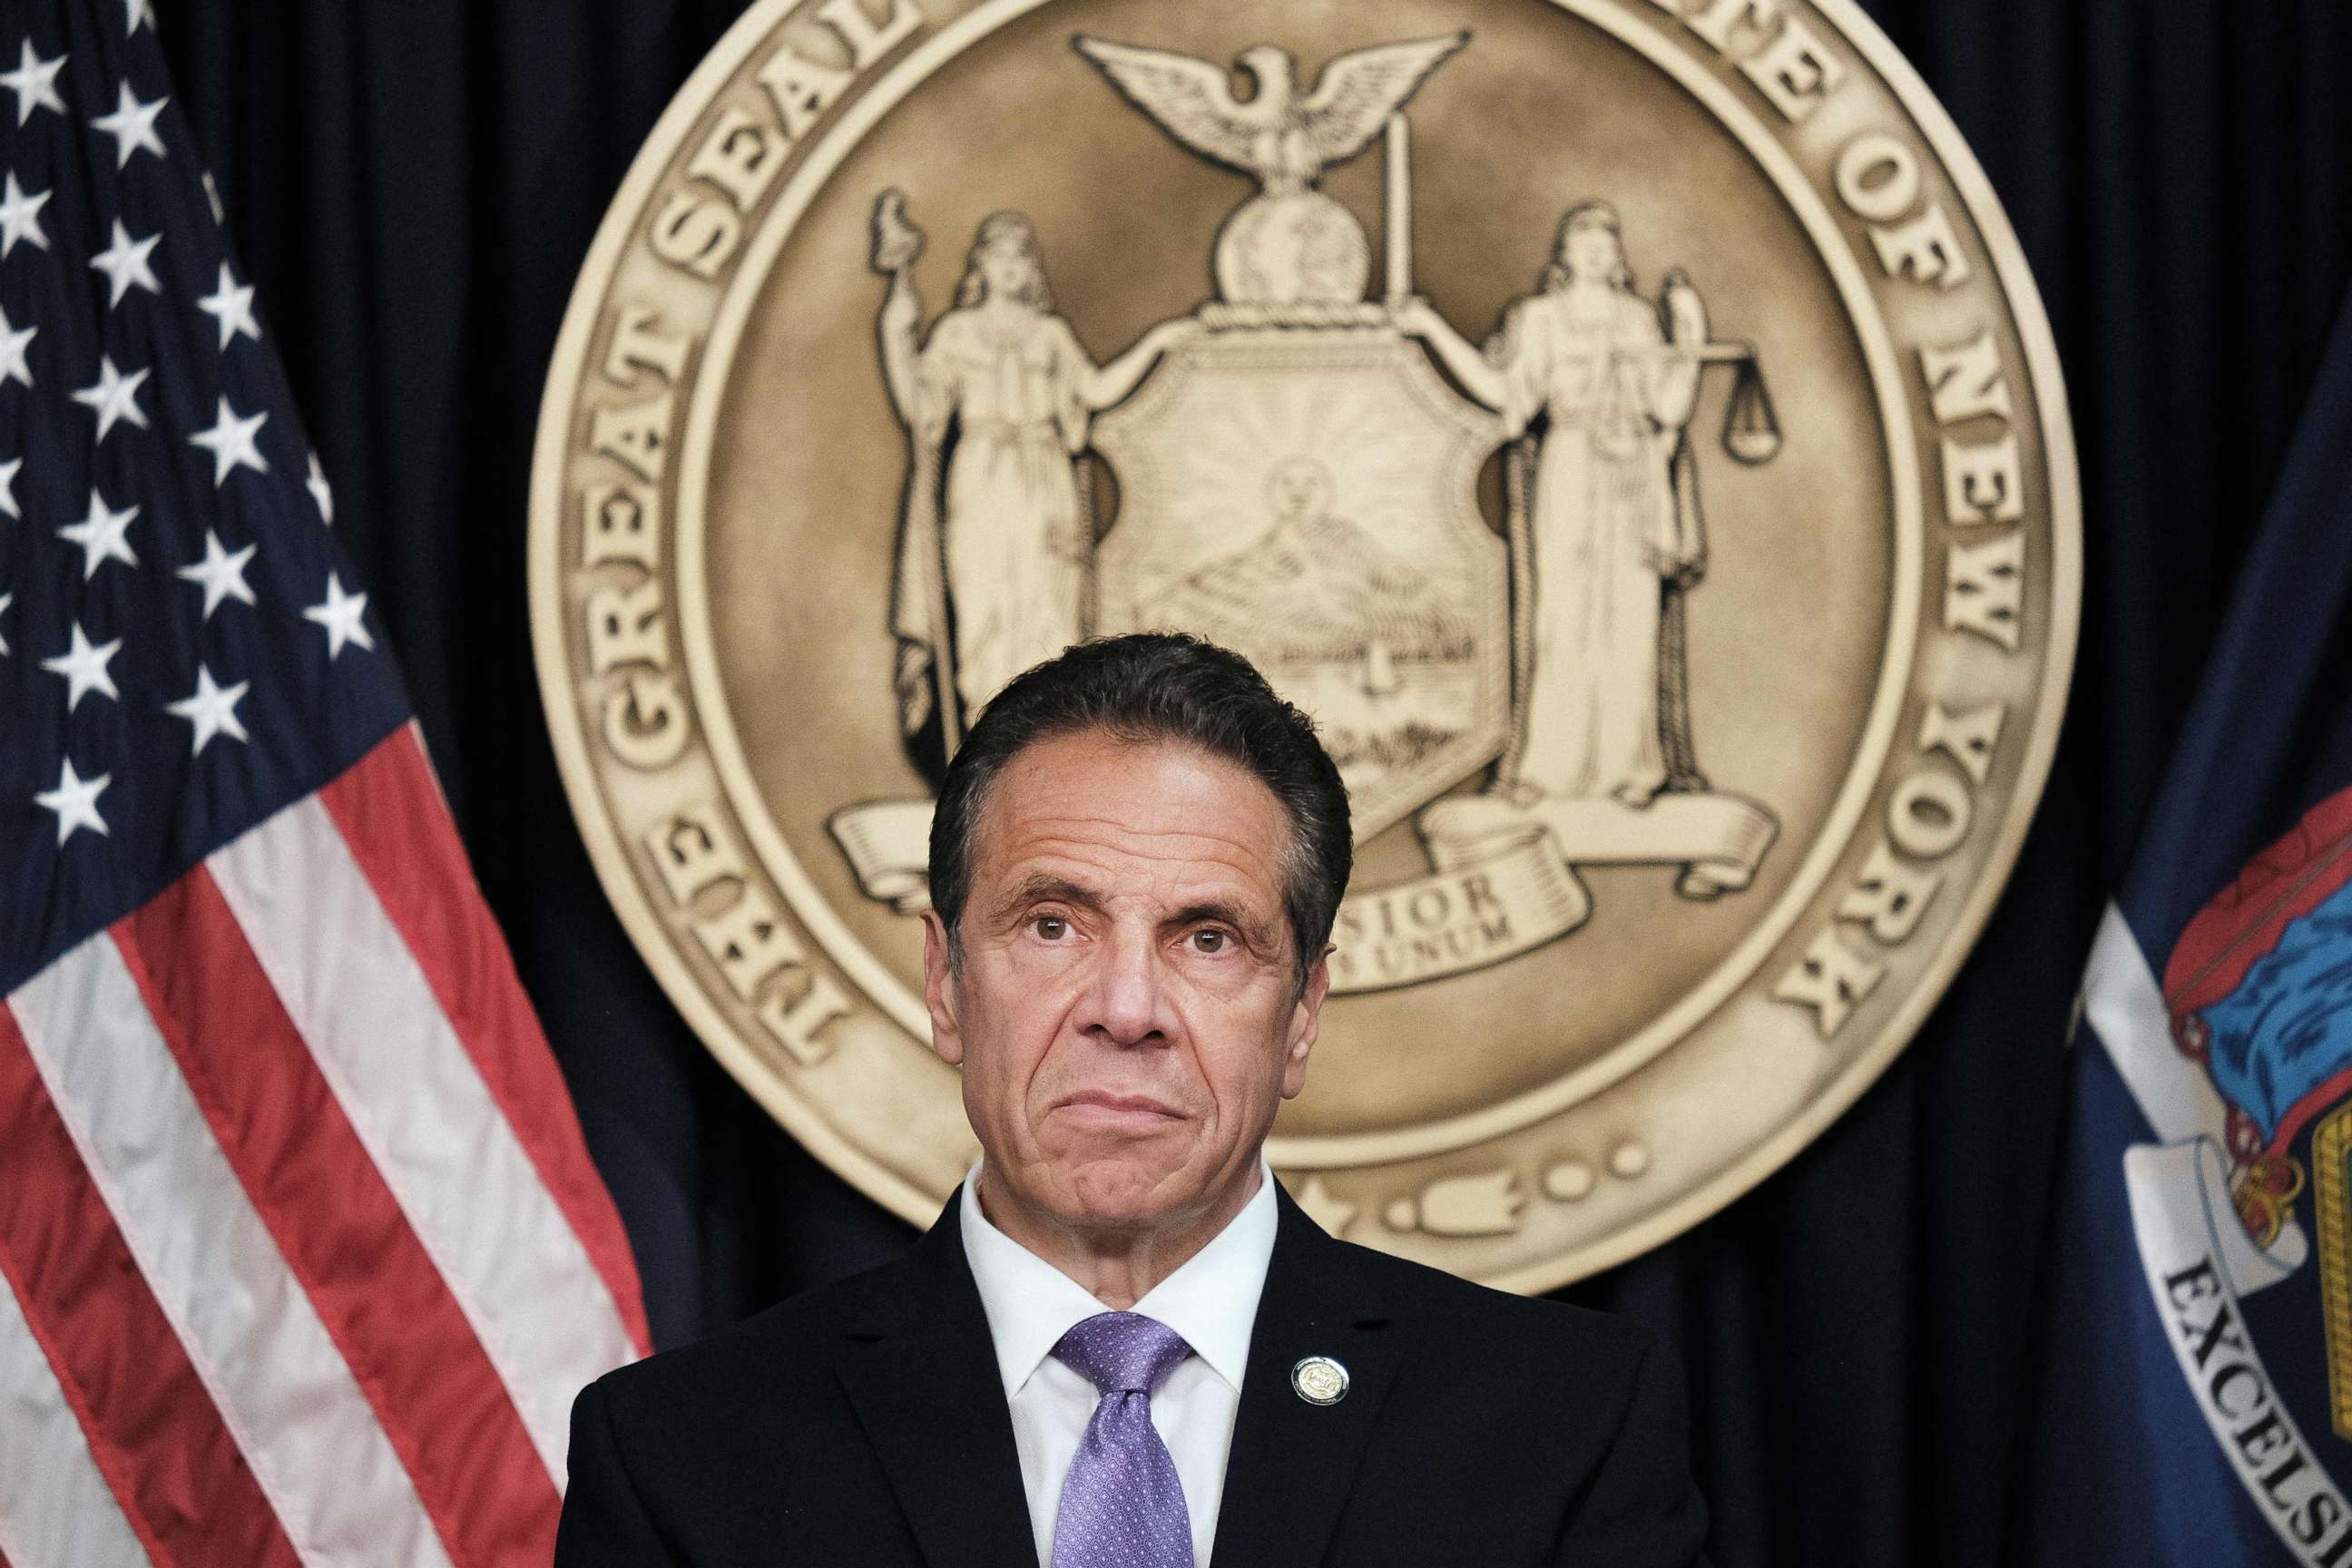 PHOTO: Governor Andrew Cuomo speaks to the media at a news conference in Manhattan on May 5, 2021, in New York.